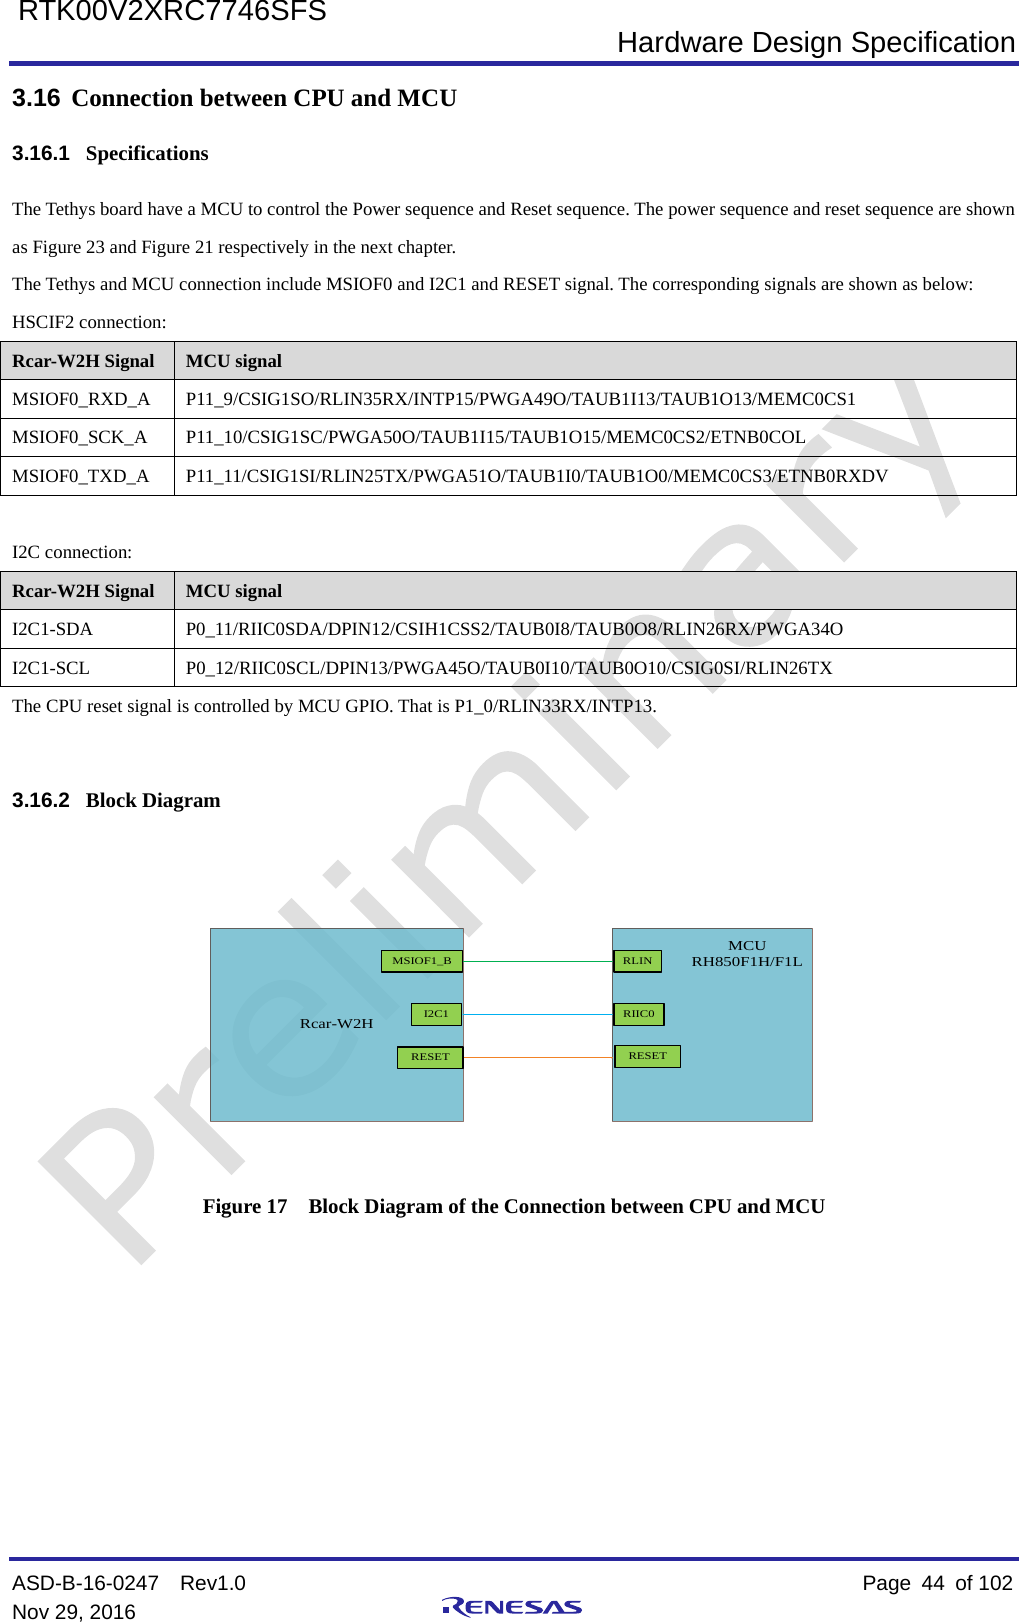  Hardware Design Specification ASD-B-16-0247  Rev1.0    Page  44 of 102 Nov 29, 2016     RTK00V2XRC7746SFS 3.16 Connection between CPU and MCU 3.16.1 Specifications The Tethys board have a MCU to control the Power sequence and Reset sequence. The power sequence and reset sequence are shown as Figure 23 and Figure 21 respectively in the next chapter. The Tethys and MCU connection include MSIOF0 and I2C1 and RESET signal. The corresponding signals are shown as below: HSCIF2 connection: Rcar-W2H Signal MCU signal MSIOF0_RXD_A  P11_9/CSIG1SO/RLIN35RX/INTP15/PWGA49O/TAUB1I13/TAUB1O13/MEMC0CS1 MSIOF0_SCK_A  P11_10/CSIG1SC/PWGA50O/TAUB1I15/TAUB1O15/MEMC0CS2/ETNB0COL MSIOF0_TXD_A  P11_11/CSIG1SI/RLIN25TX/PWGA51O/TAUB1I0/TAUB1O0/MEMC0CS3/ETNB0RXDV  I2C connection: Rcar-W2H Signal MCU signal I2C1-SDA  P0_11/RIIC0SDA/DPIN12/CSIH1CSS2/TAUB0I8/TAUB0O8/RLIN26RX/PWGA34O I2C1-SCL  P0_12/RIIC0SCL/DPIN13/PWGA45O/TAUB0I10/TAUB0O10/CSIG0SI/RLIN26TX The CPU reset signal is controlled by MCU GPIO. That is P1_0/RLIN33RX/INTP13.  3.16.2 Block Diagram   Rcar-W2HMSIOFI2C1RESETMSIOF1_BI2C1RESETMCURH850F1H/F1LRIIC0RESETRLIN      Figure 17  Block Diagram of the Connection between CPU and MCU      